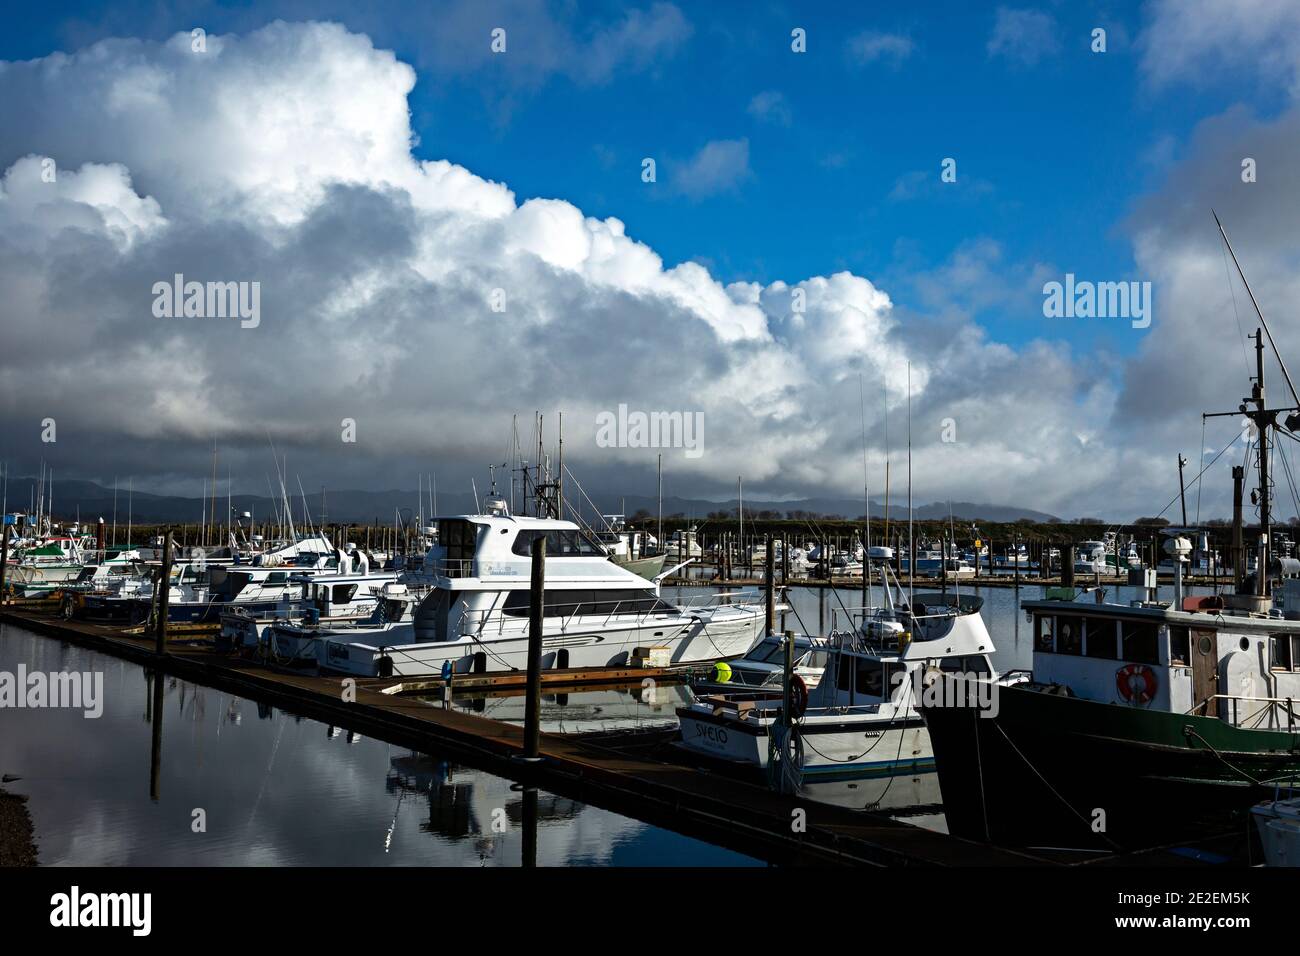 WA19126-00...WASHINGTON - Boats at the Illwaco Marina located on the shores of the Columbia River at the southern end of the Long Beach Peninsula. Stock Photo